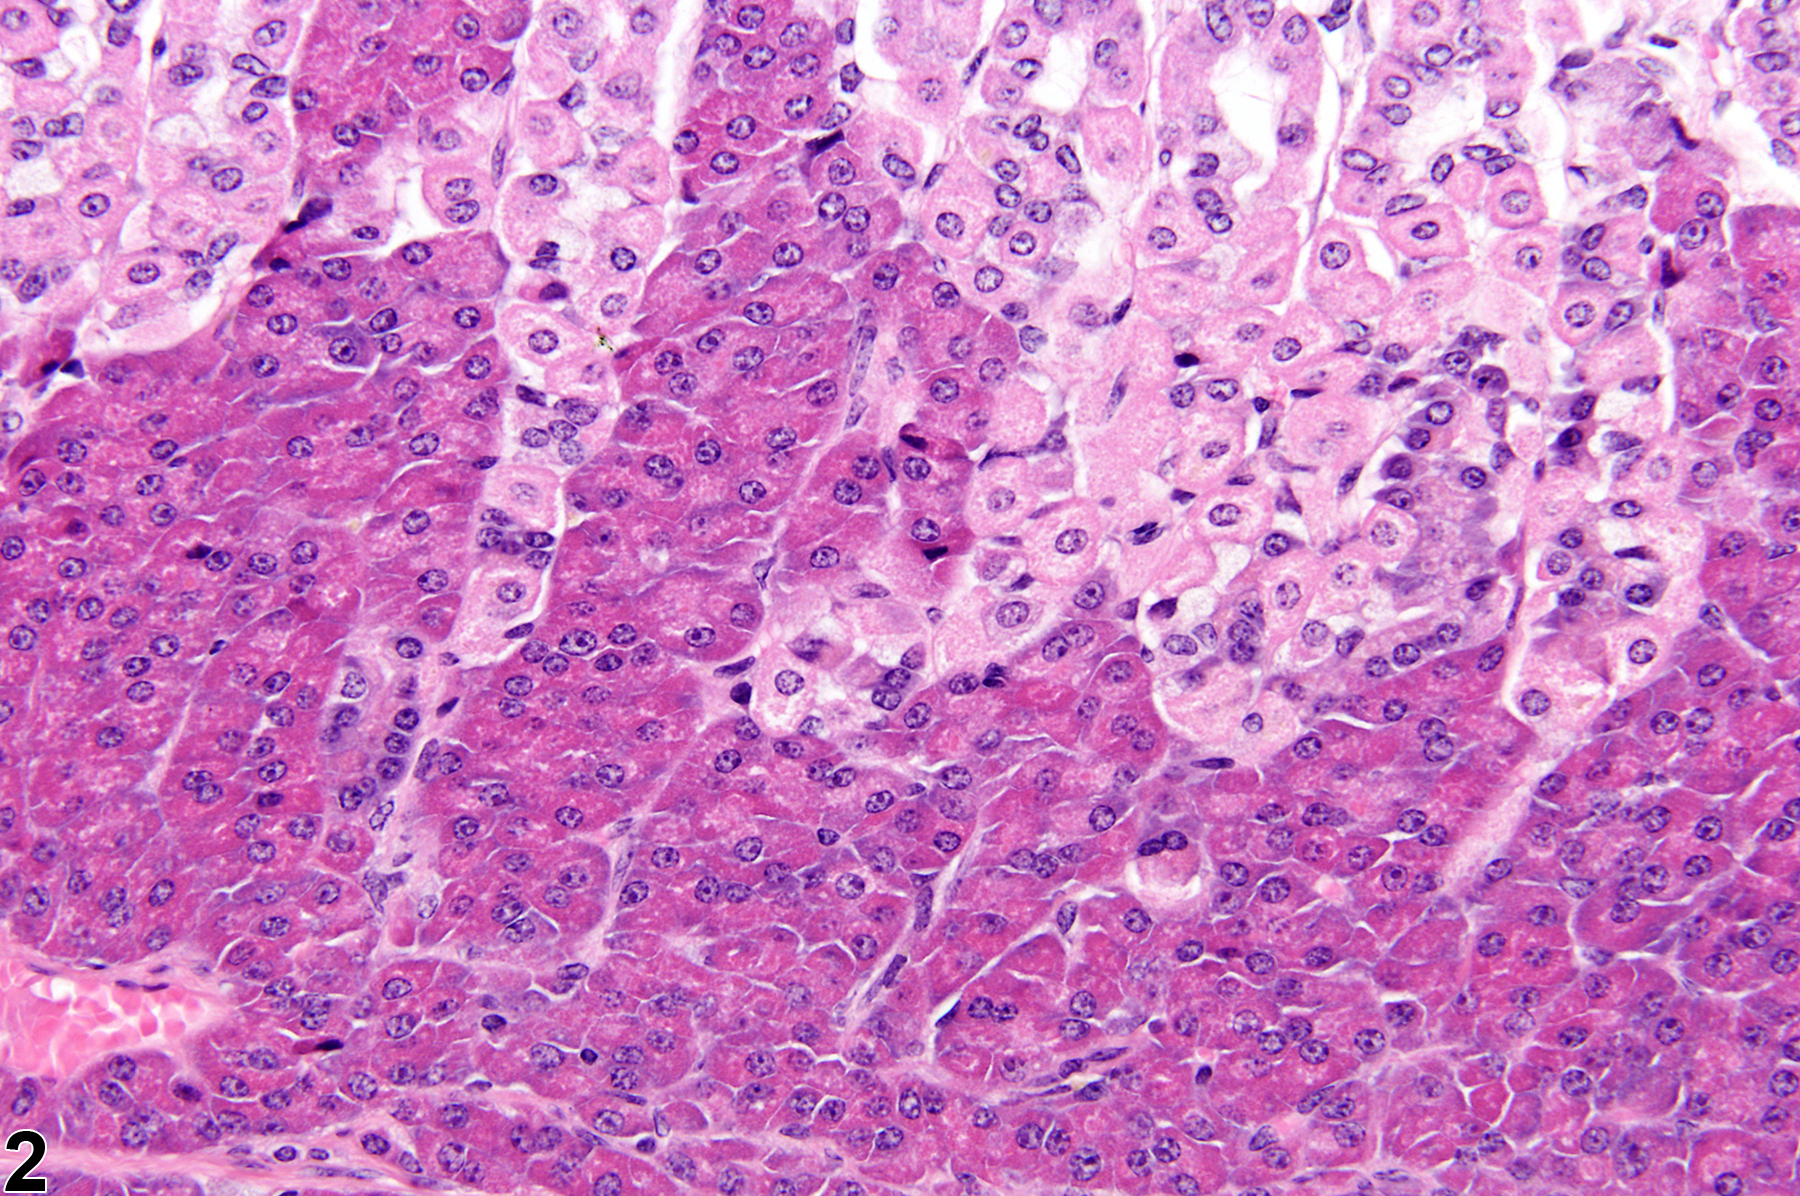 Image of ectopic tissue (pancreas) in the glandular stomach from a female B6C3F1 mouse in a chronic study